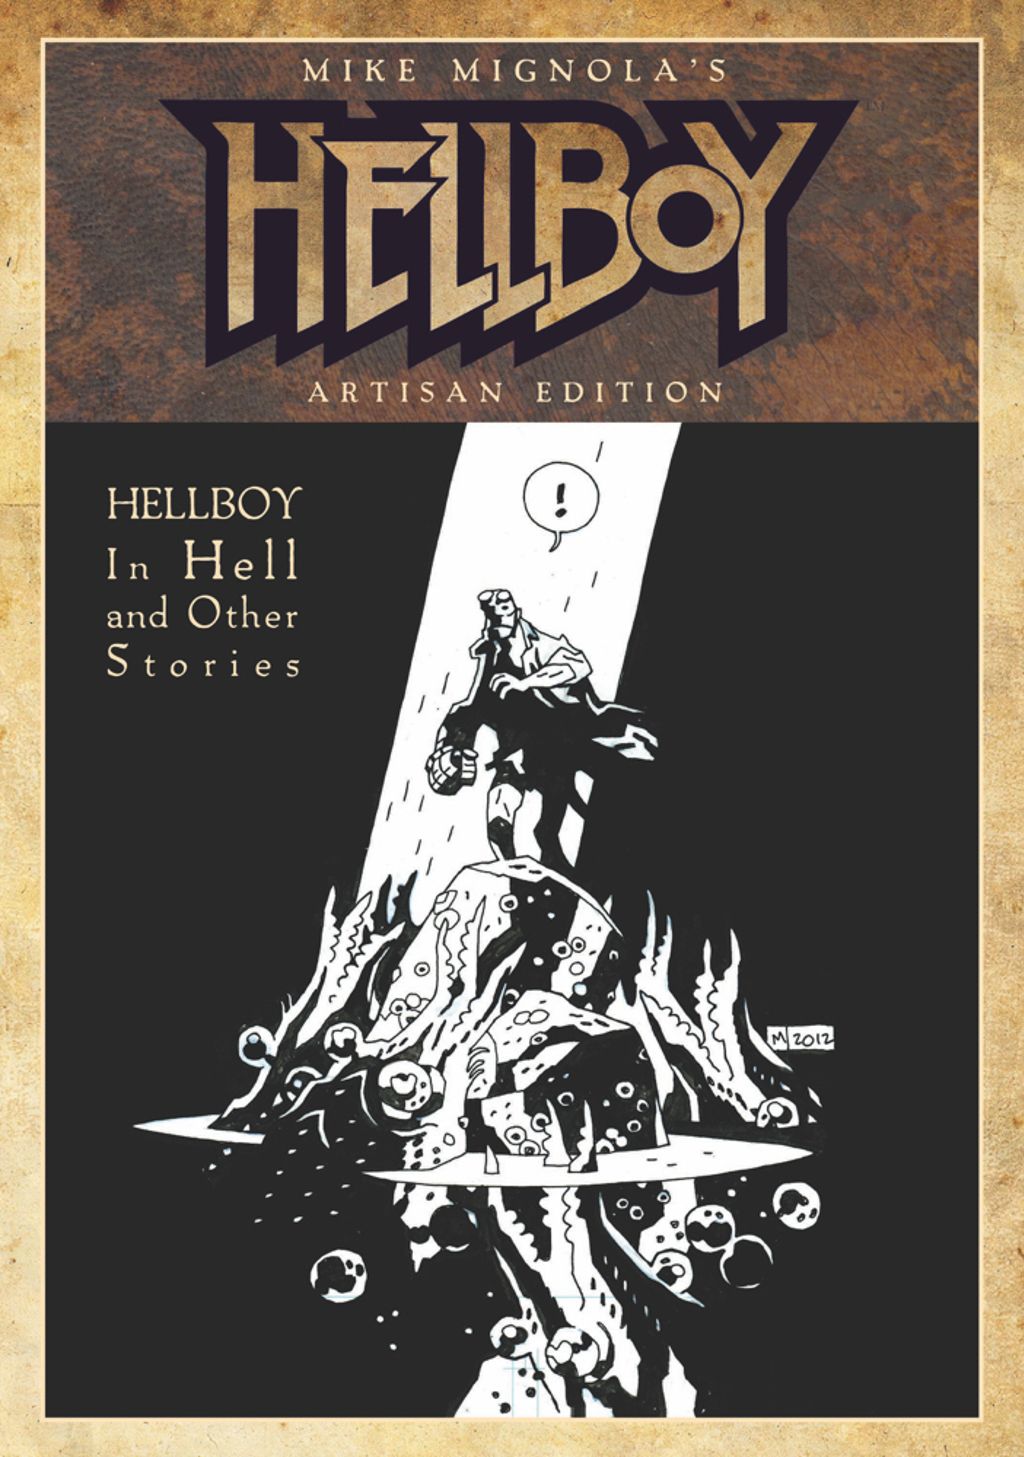 Mike Mignola’s Hellboy in Hell and Other Stories Artisan Edition